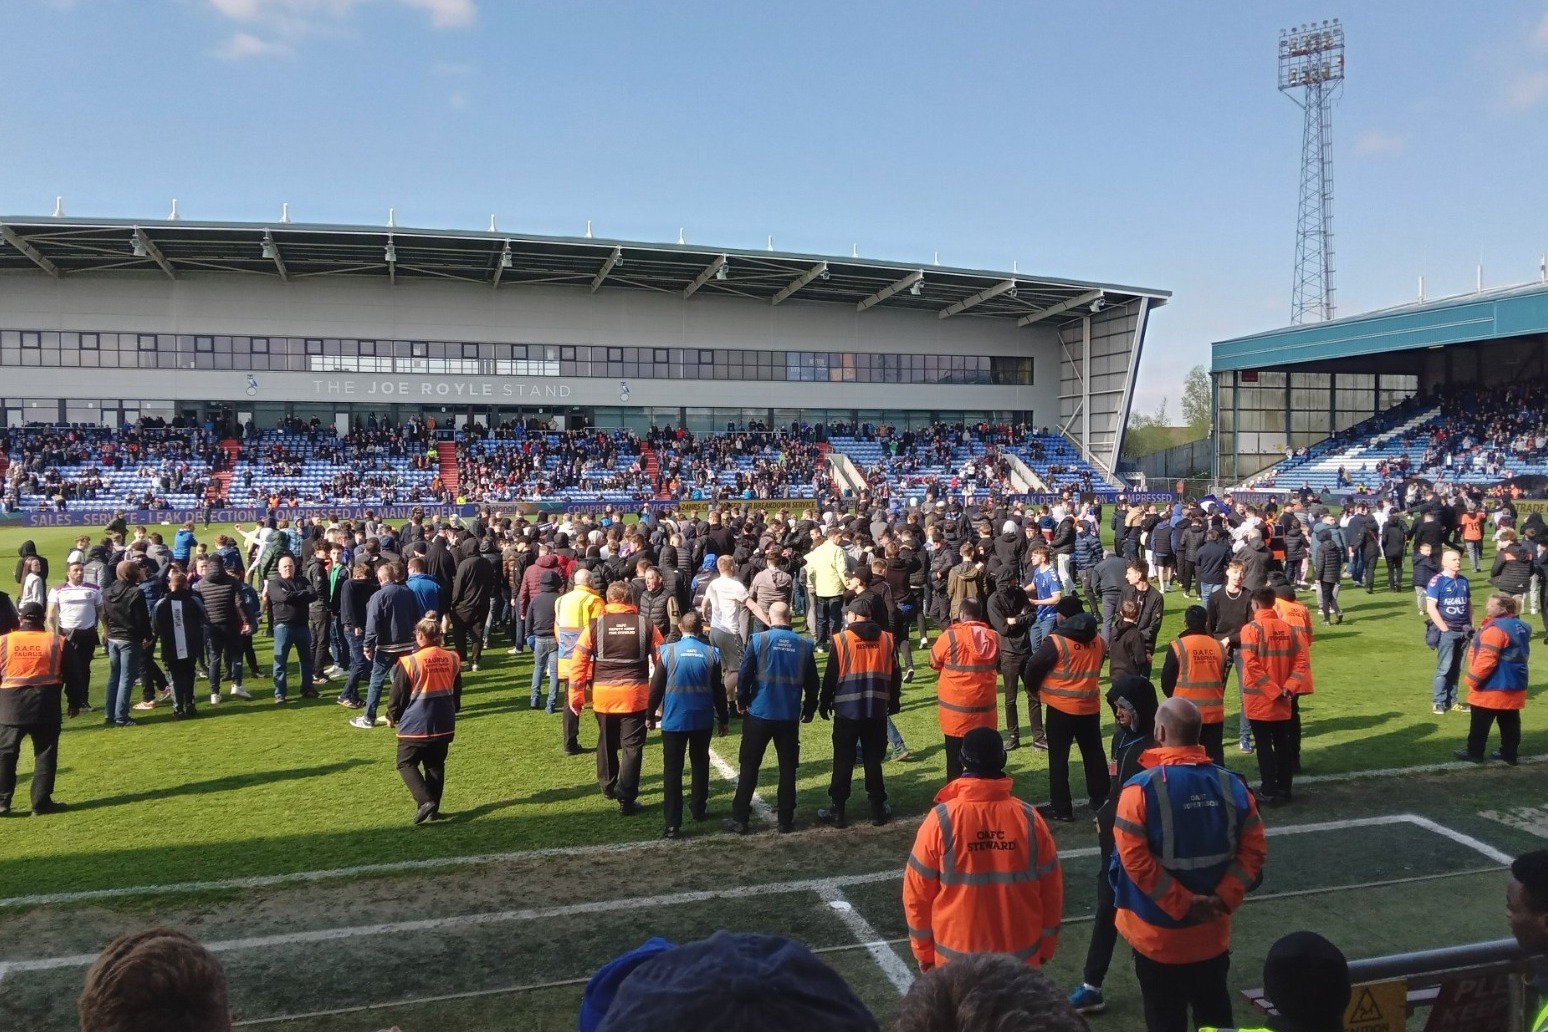 Oldham to ban fans who invaded pitch during defeat that confirmed relegation 